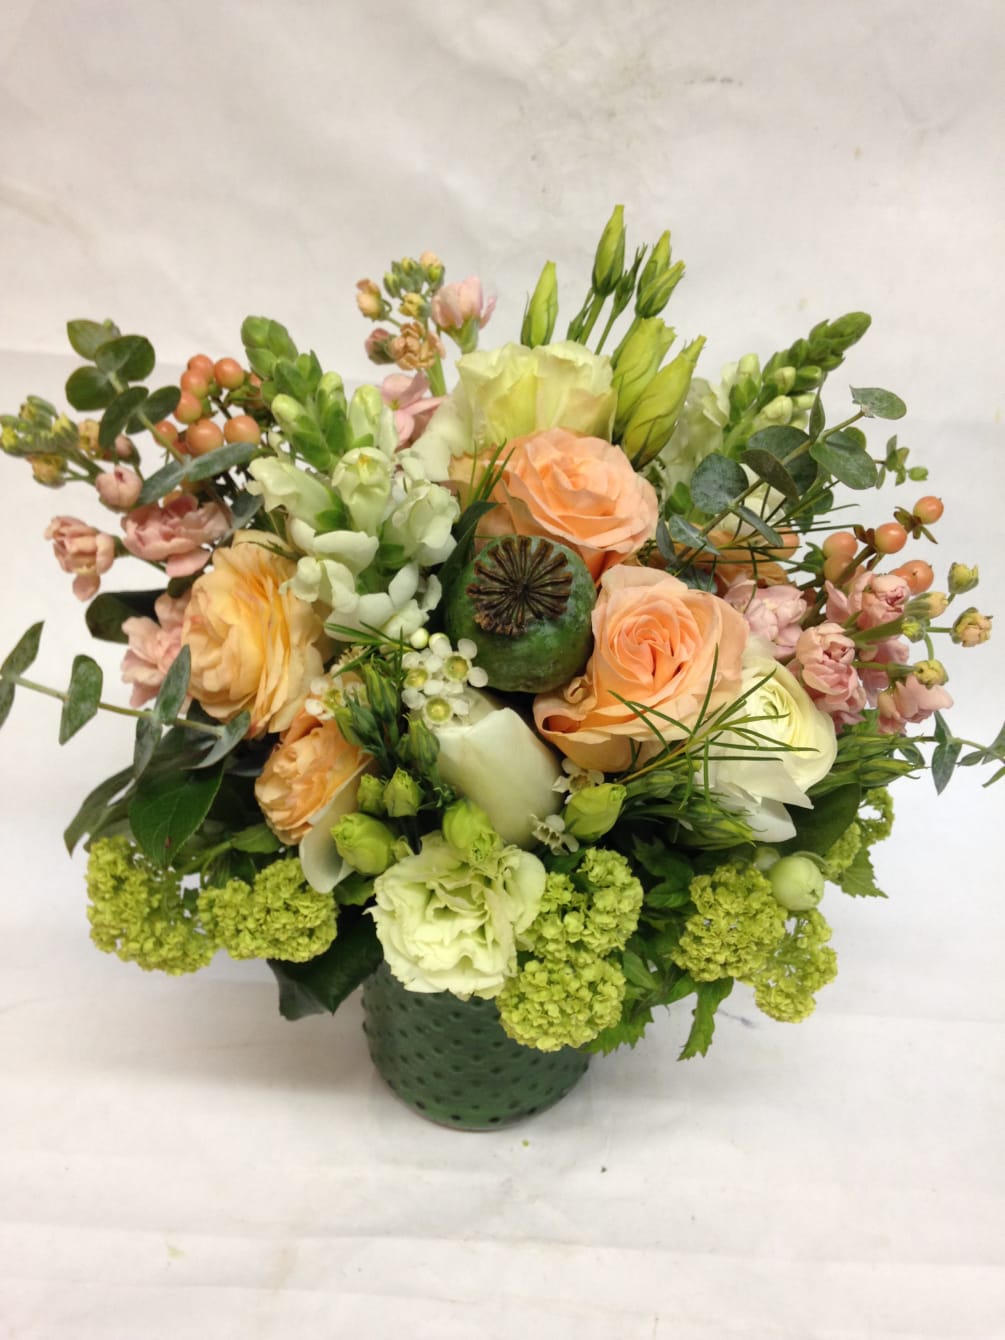 This pastel beauty is a lush treat, featuring peach roses,spray roses, stock